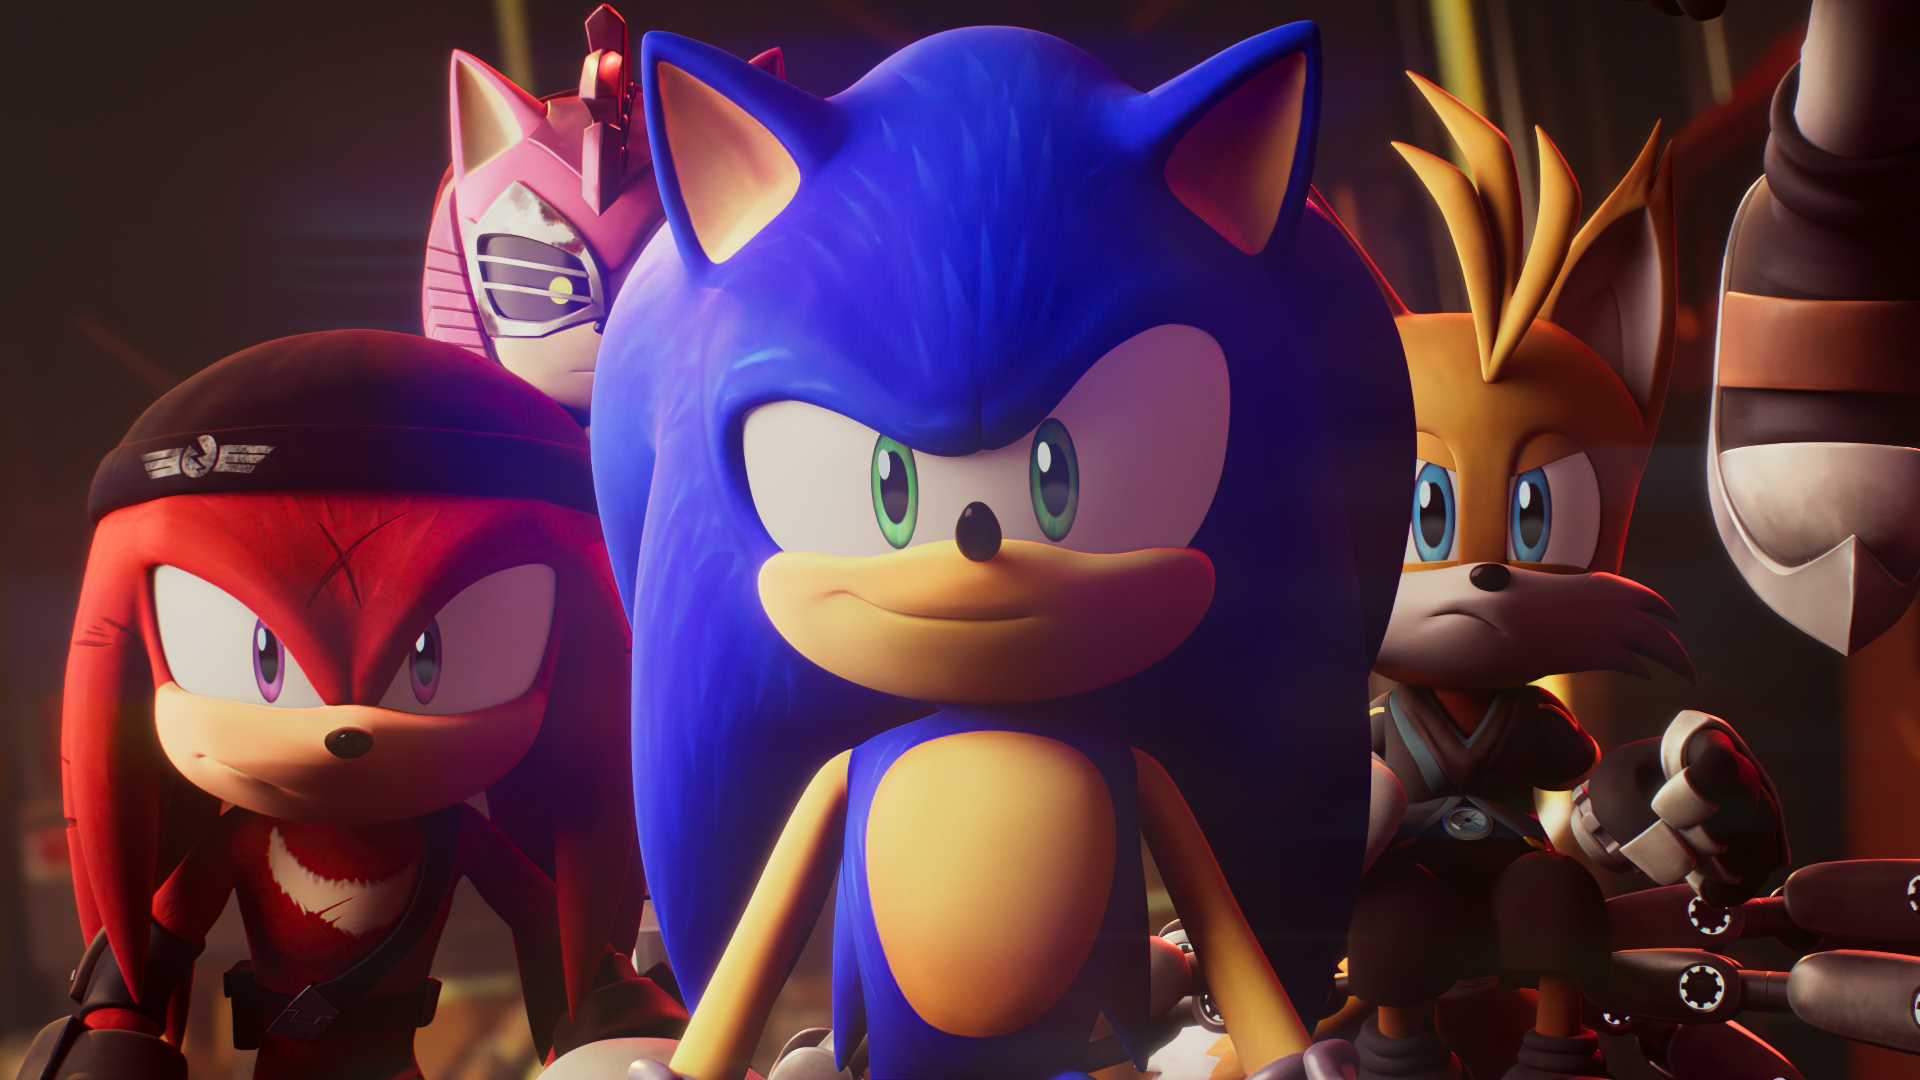 Sonic Prime - Sonic #10 by SonicBoomGirl23 on DeviantArt